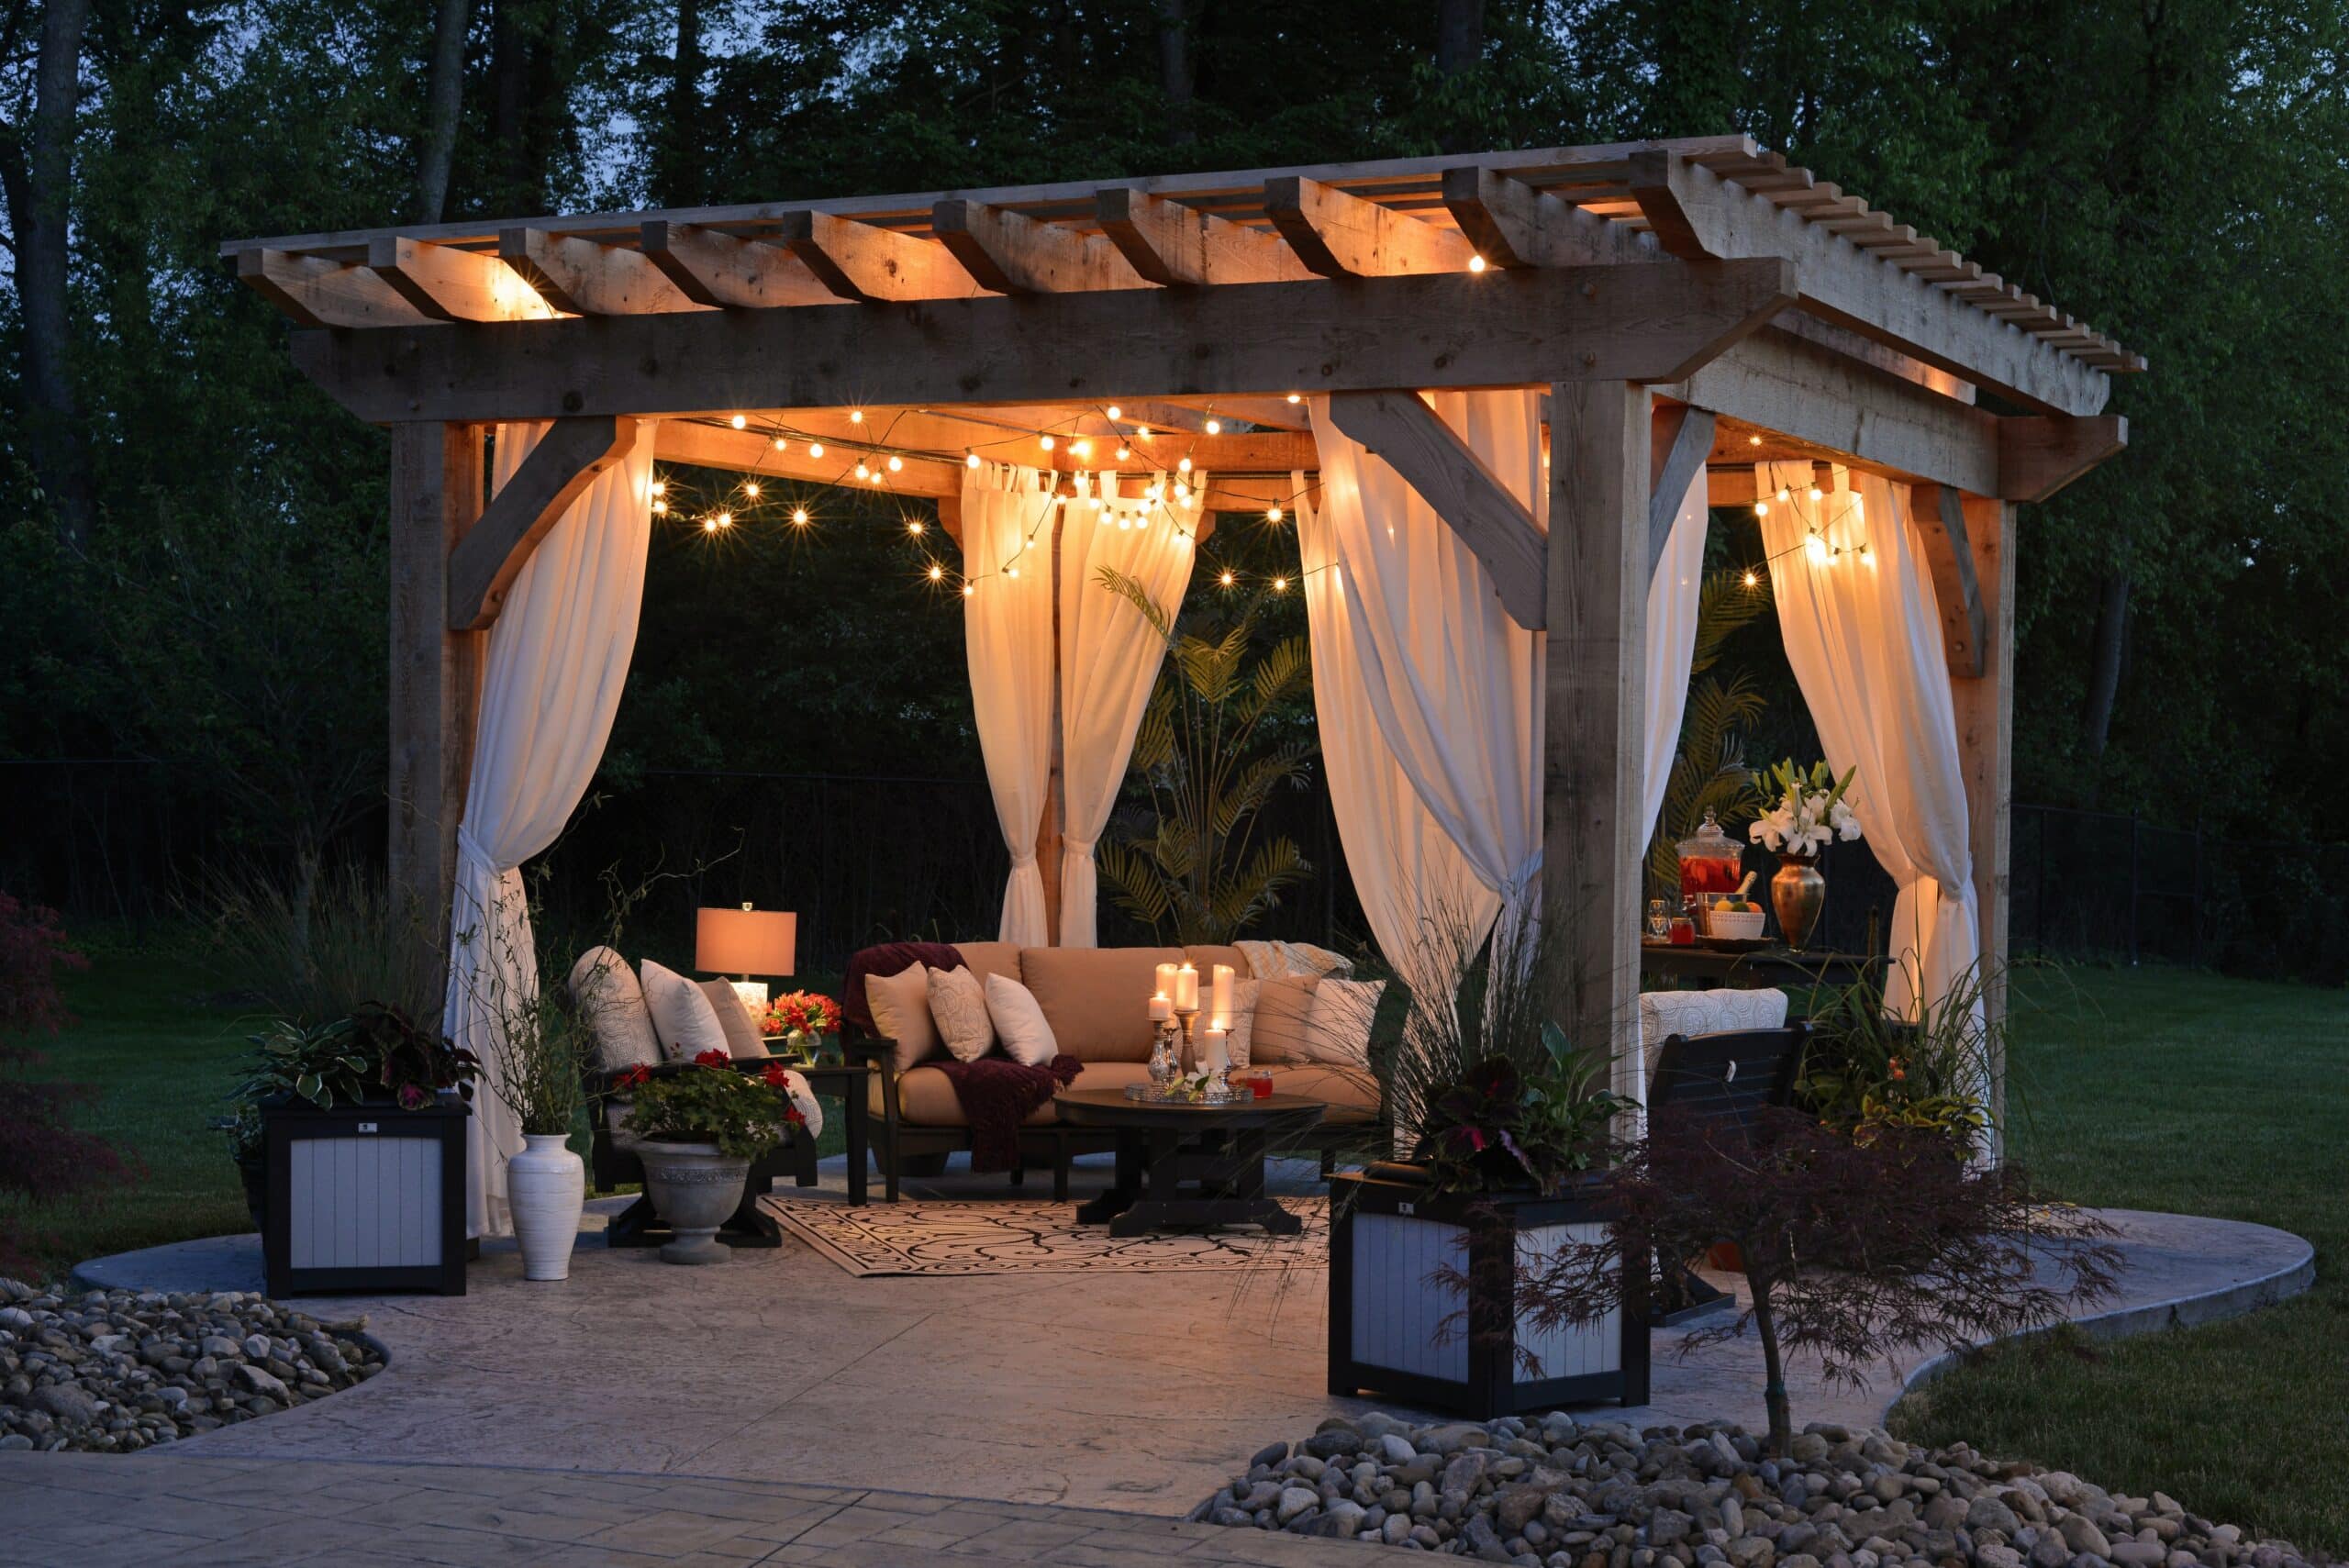 Best pergola material for Texas, Arizona, Florida or any other hot climate